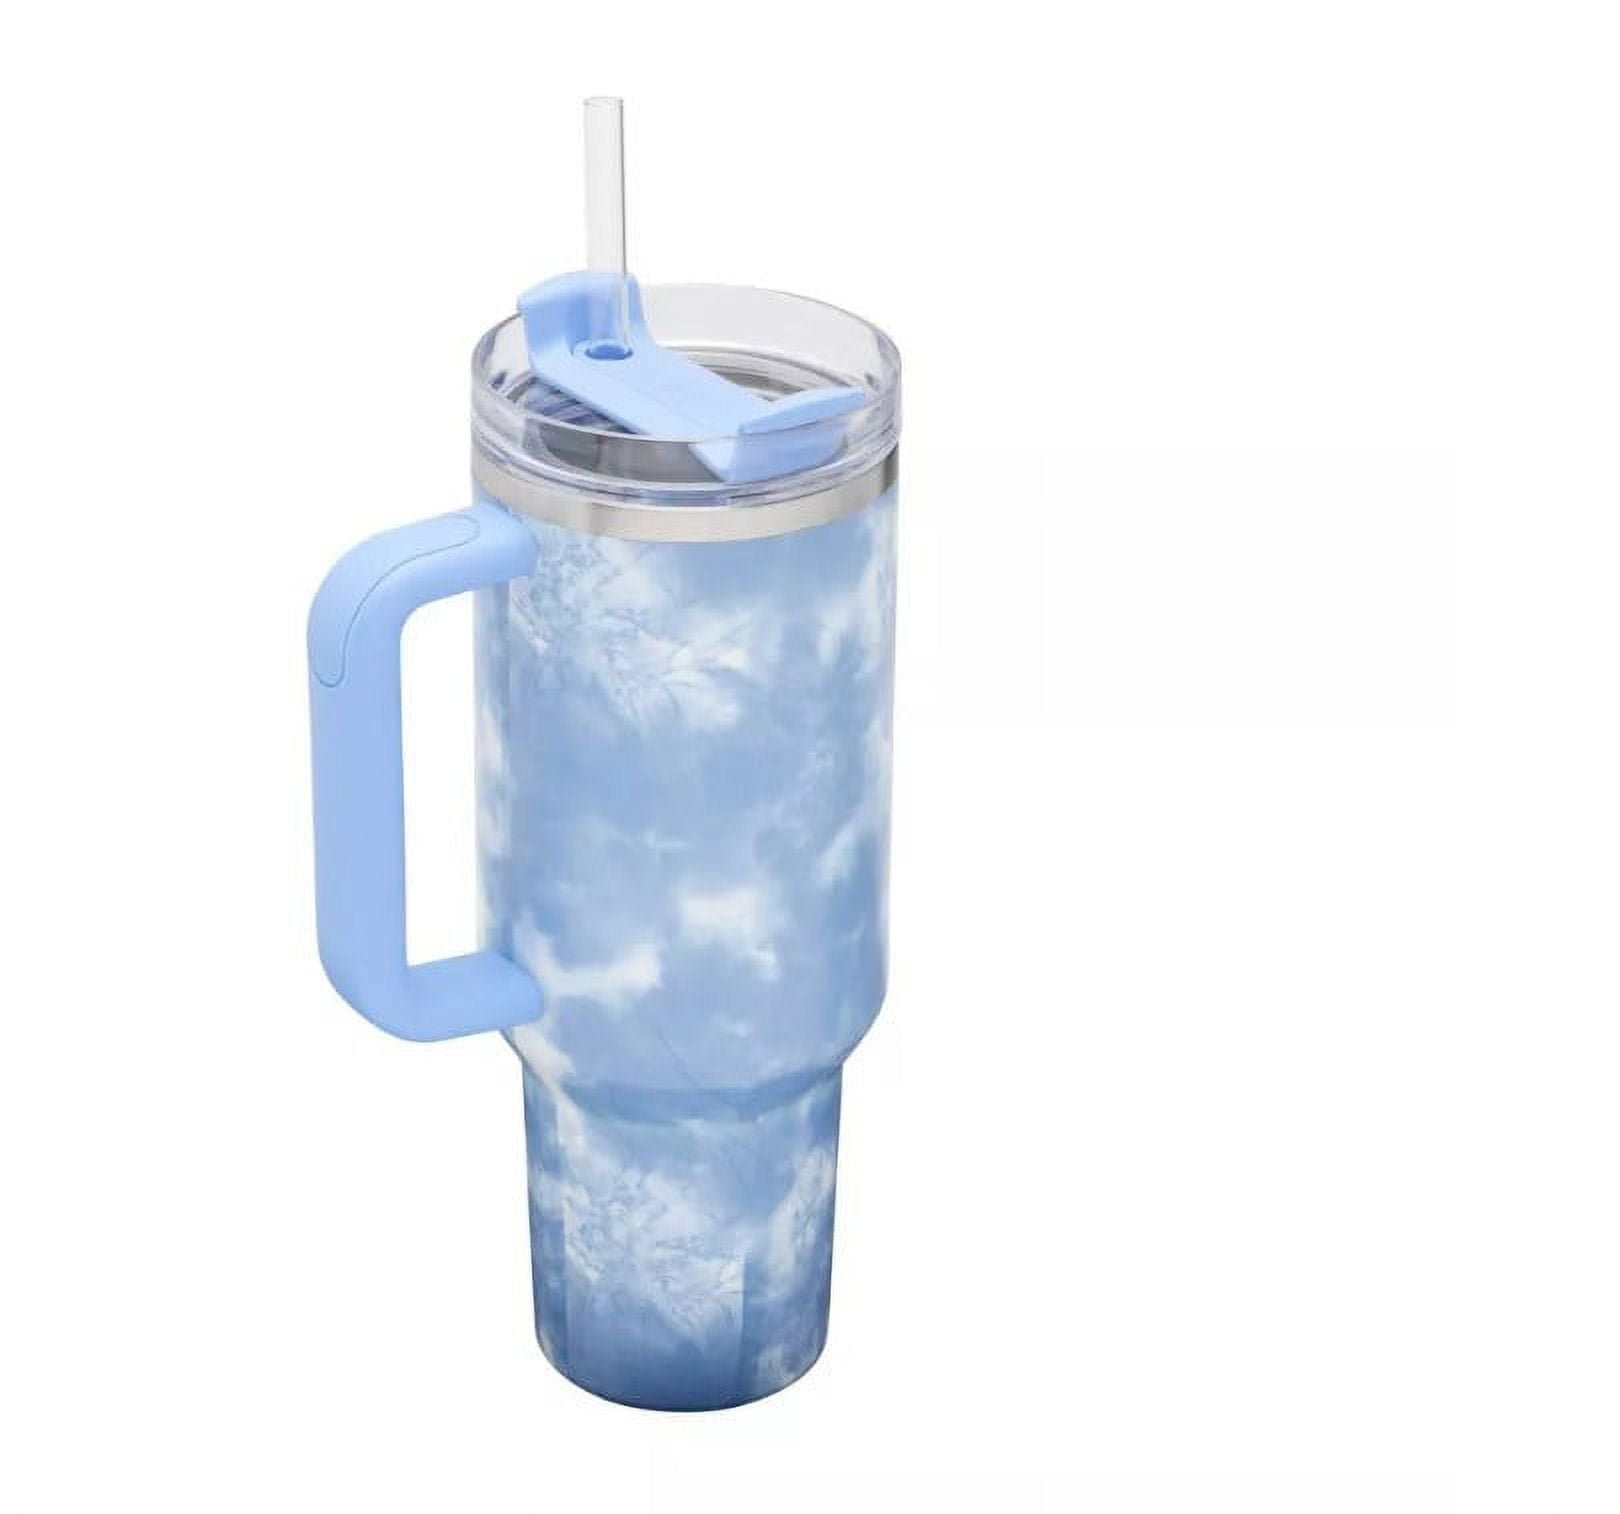 Stanley 40 oz Tumbler Handle Straw 🔥 Steel Flowstate Quencher H2.0 | Pool  Blue